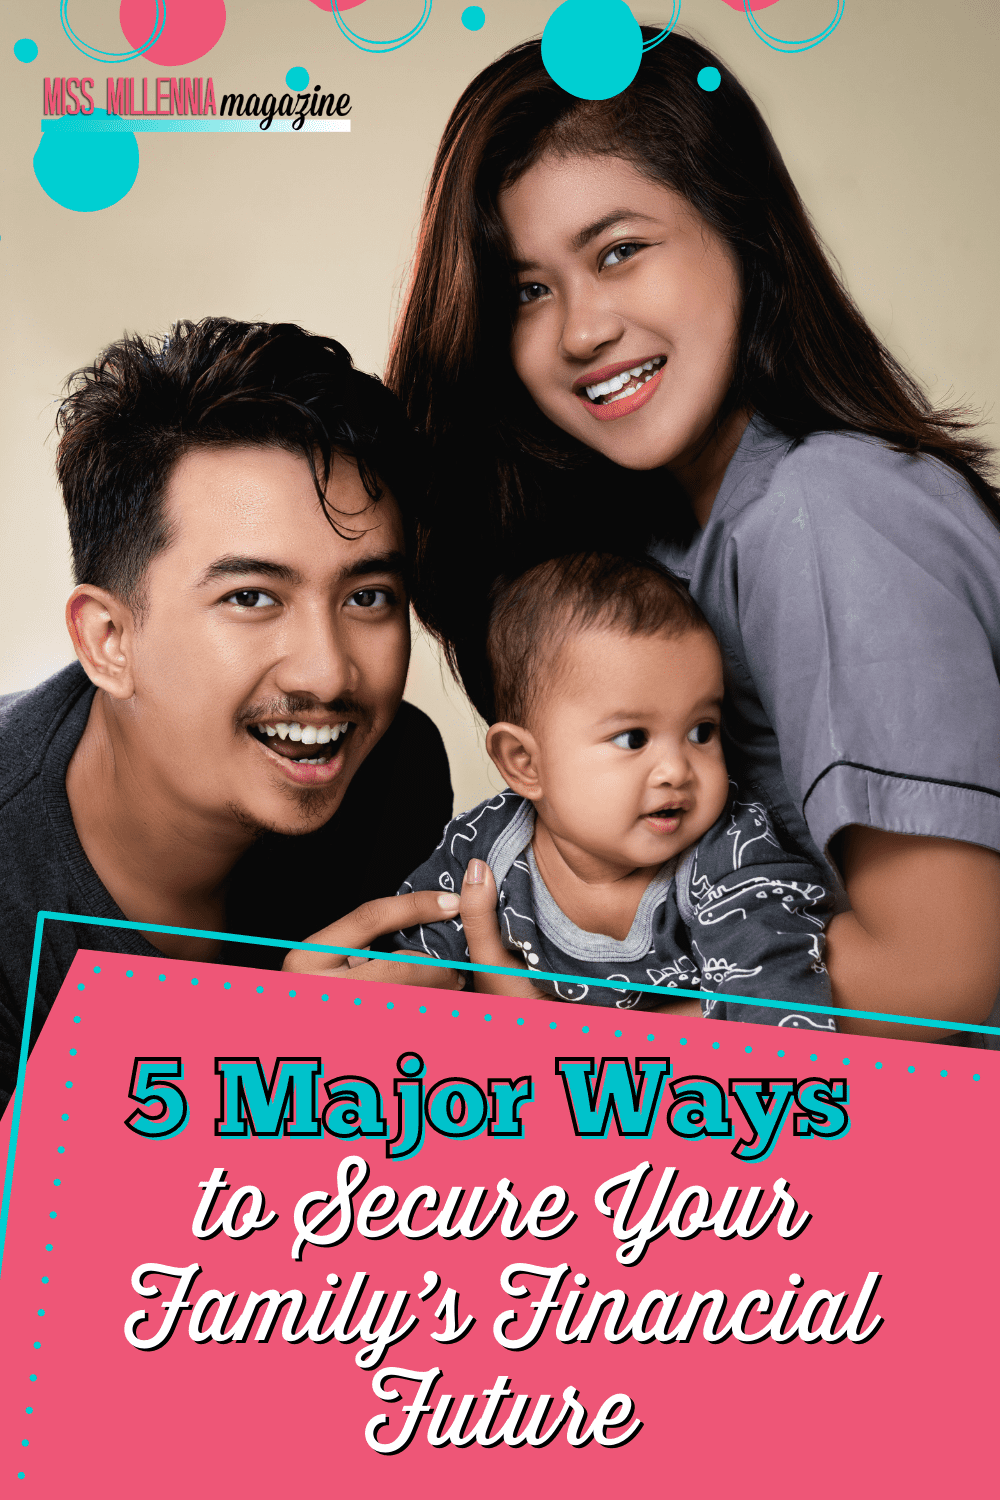 5 Major Ways to Secure Your Family’s Financial Future